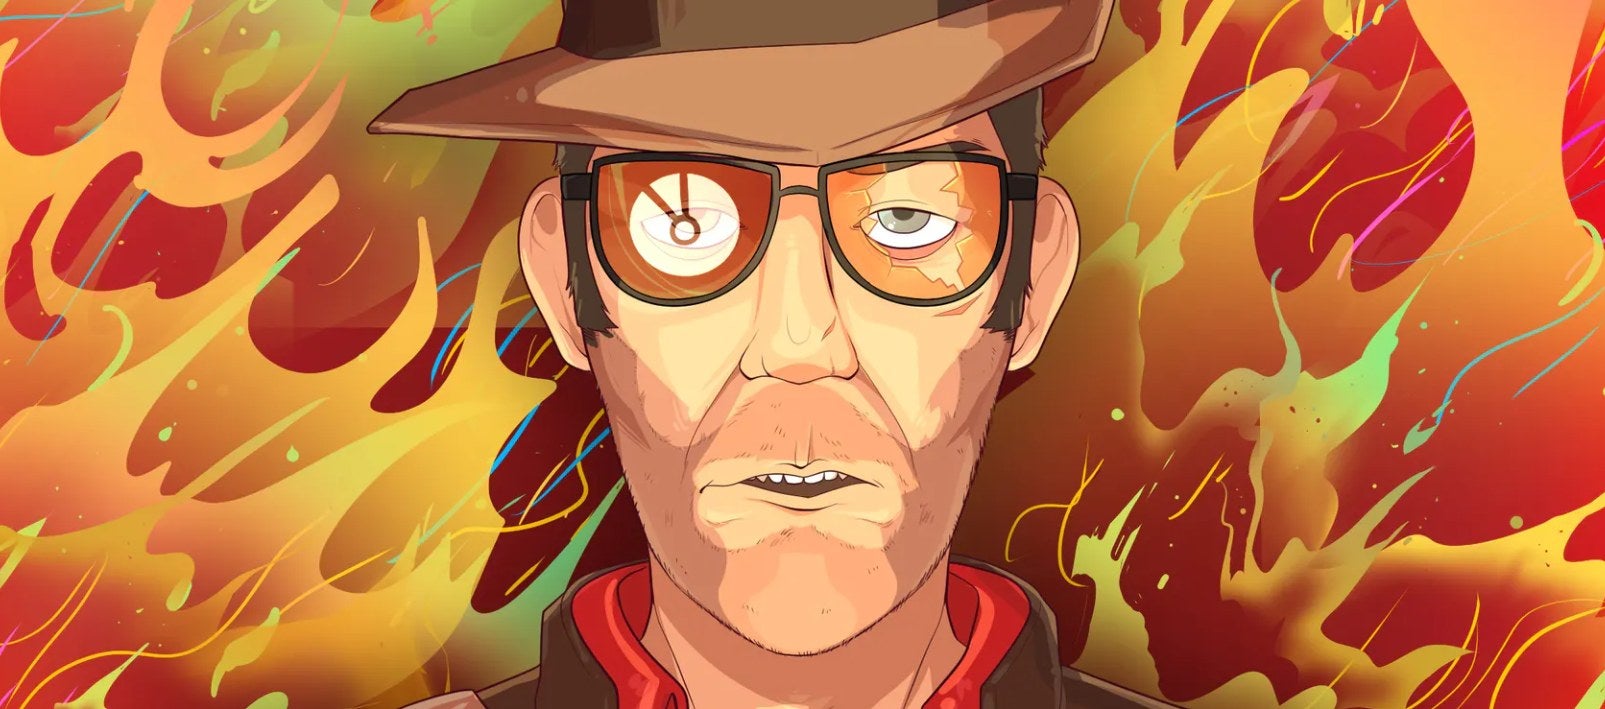 The Sniper looks unwell in a parody/homage to the key art for Hotline Miami.